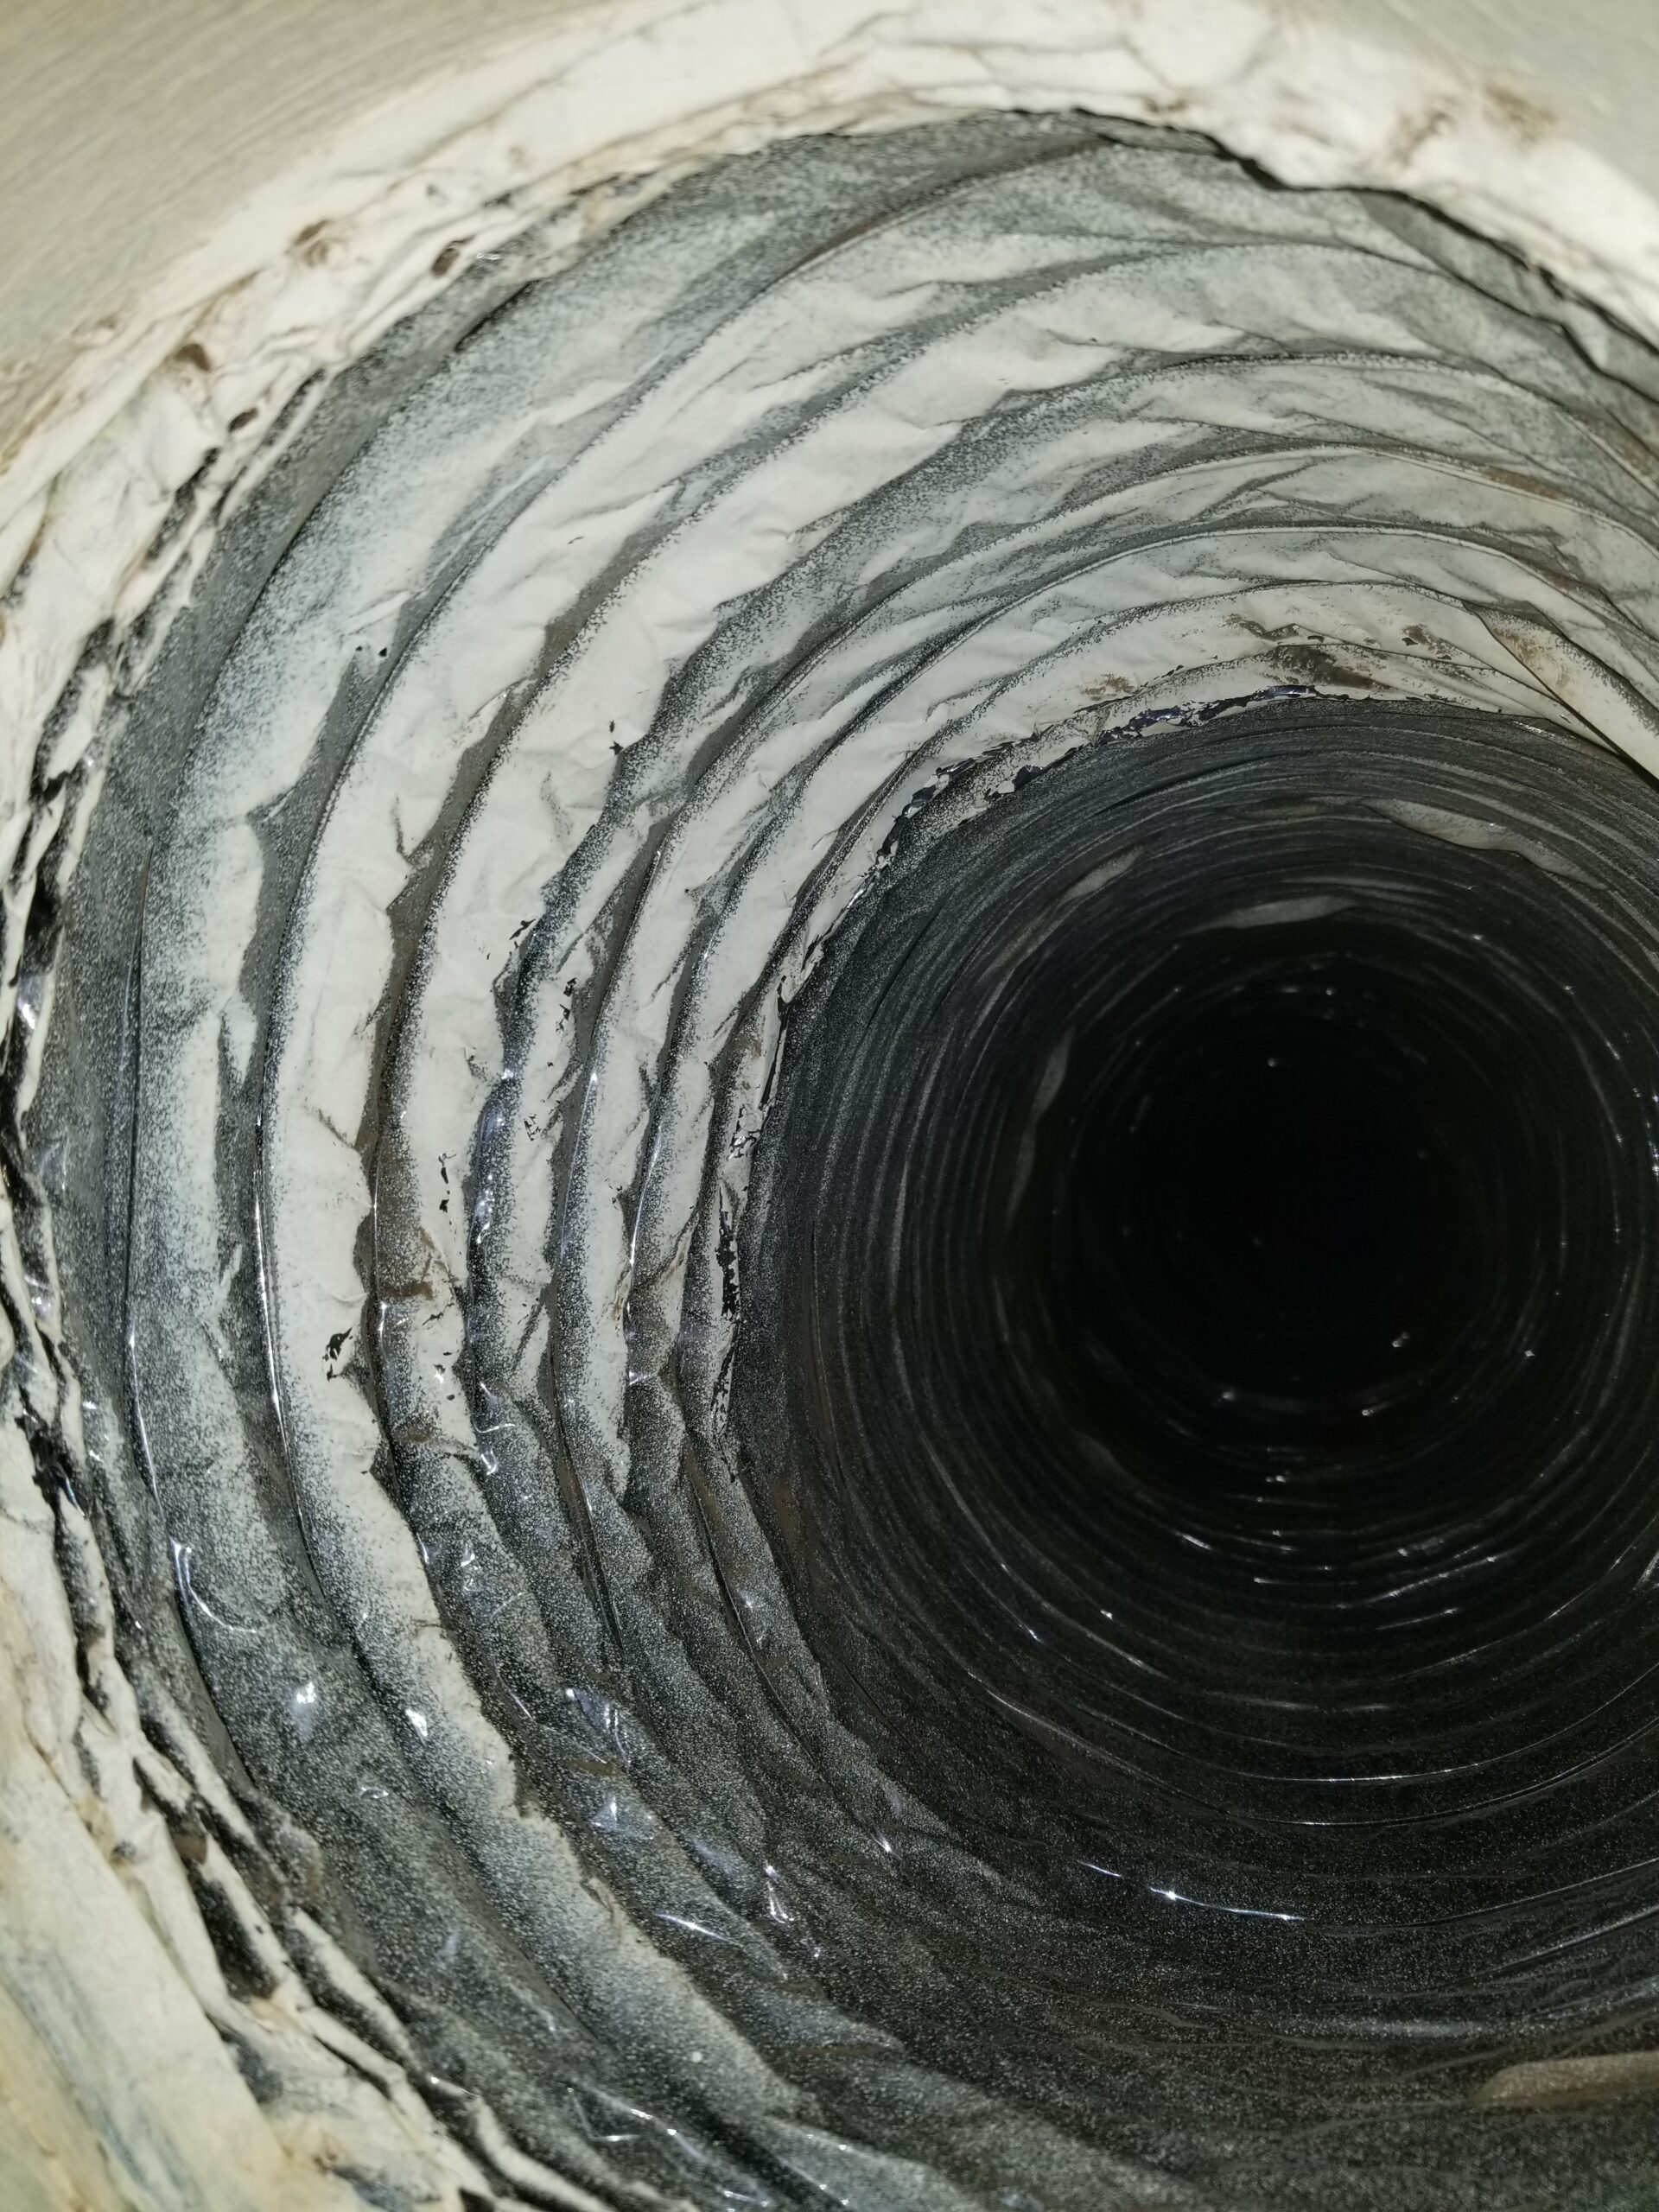 Dryer Duct Cleaning